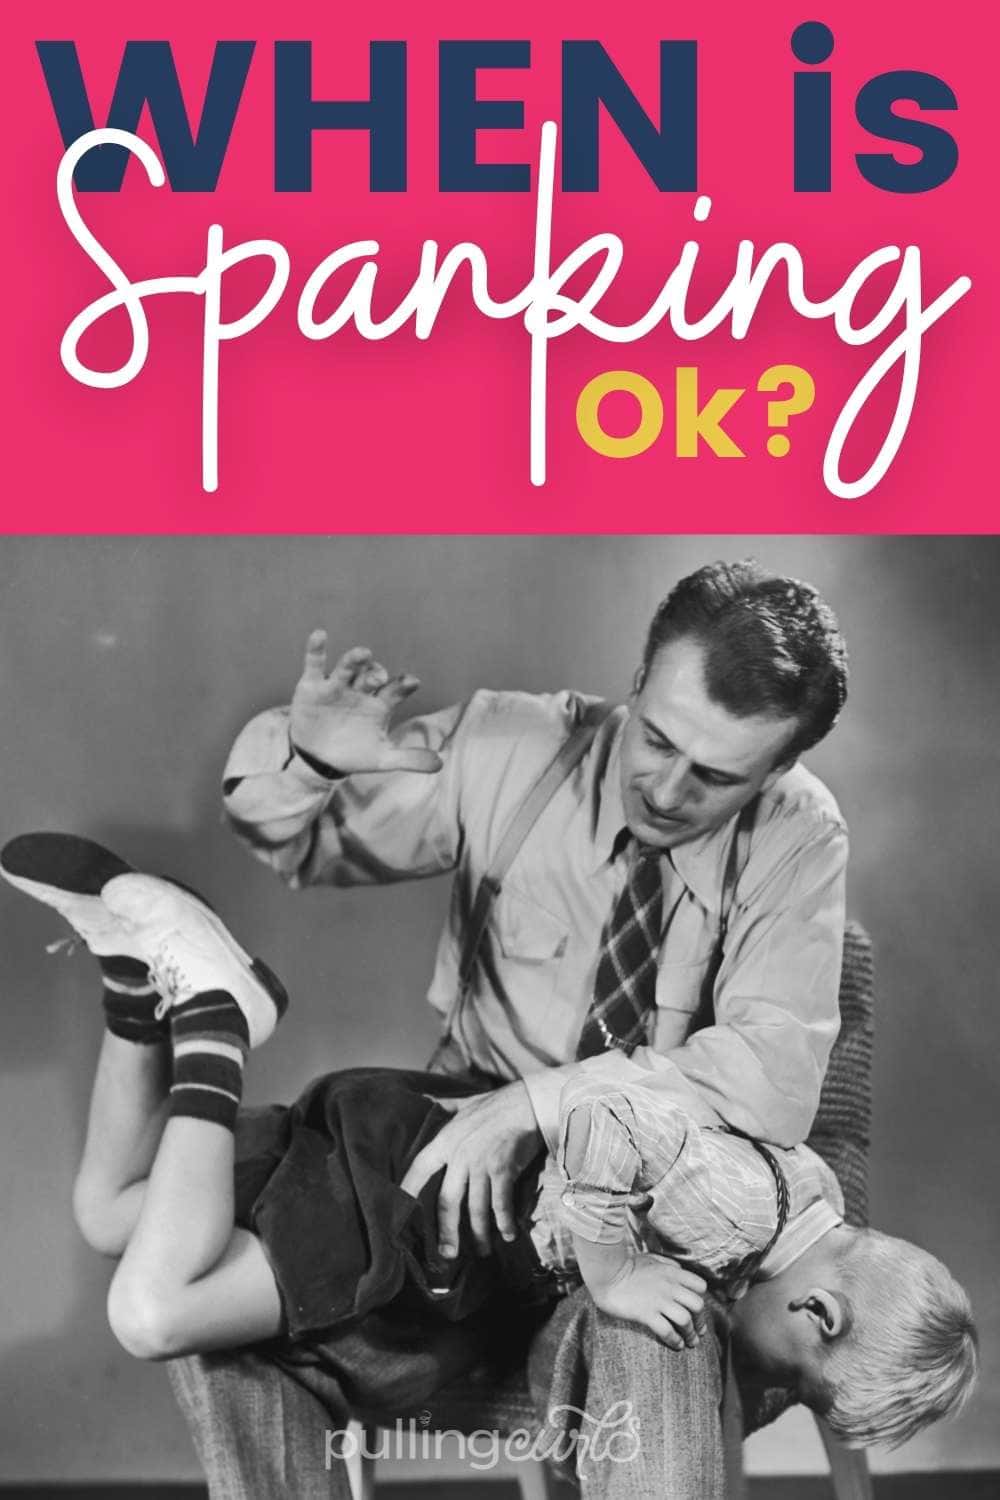 How to spank a child.  What does your kid need to do to deserve a spanking?  Many of us have memories of being spanked as a child.  Spanking has gotten a bad rap in the past few years, even though for a lot of us, it was our parent's discipline of choice. via @pullingcurls